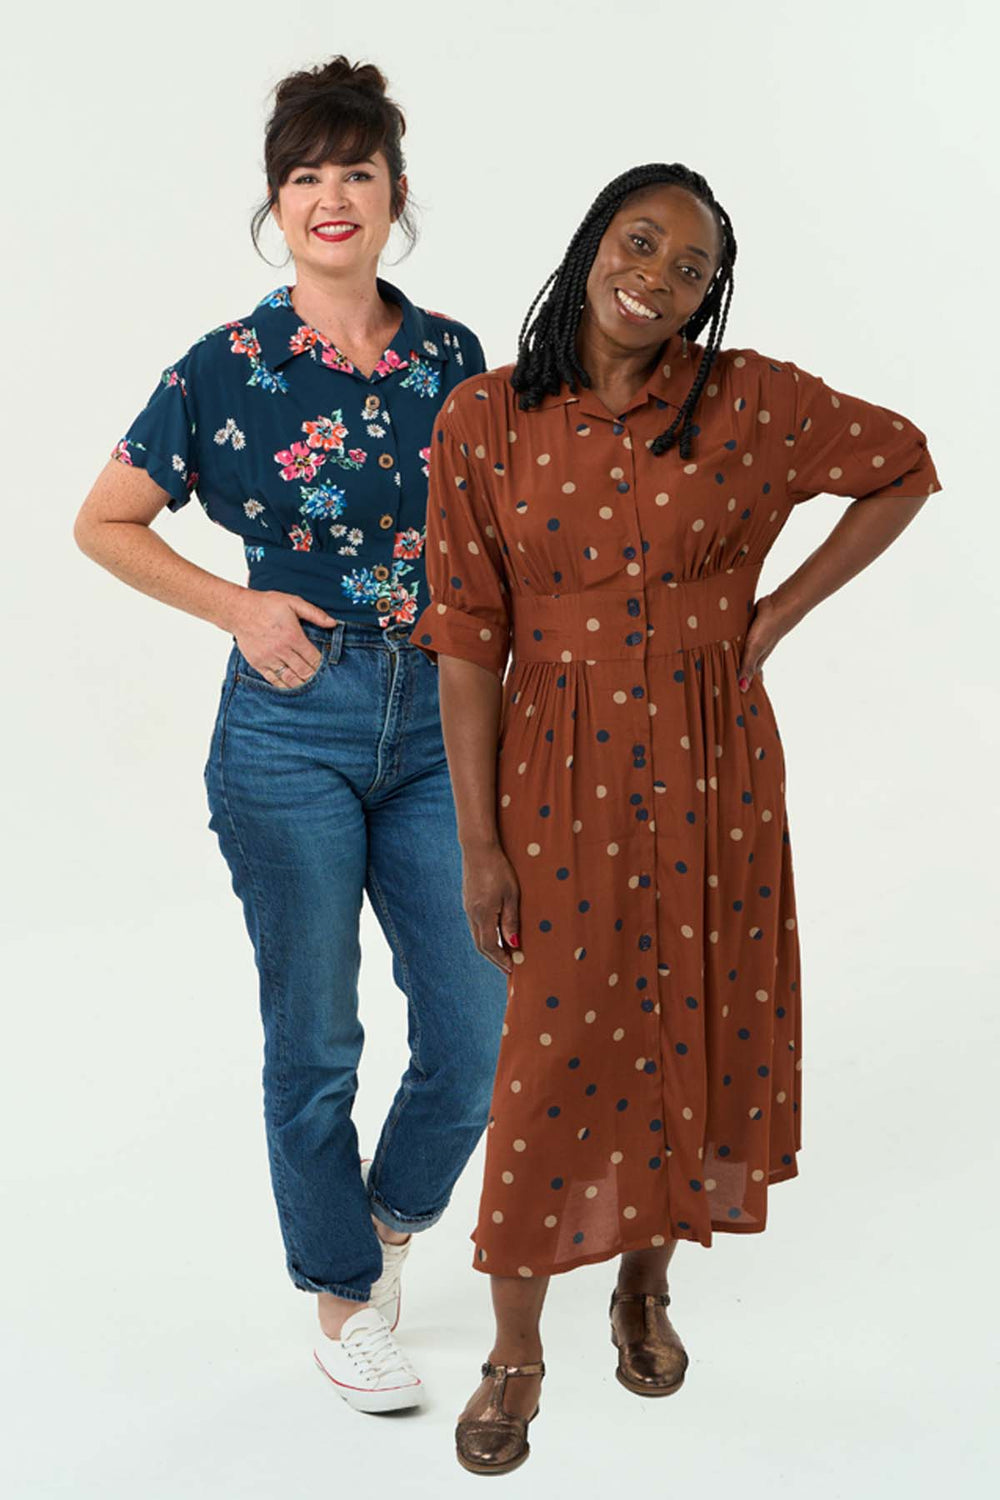 Women wearing the Viola Dress and Blouse sewing pattern from Sew Over It on The Fold Line. A dress and blouse pattern made in cotton, cotton poplin, cotton lawn, cotton sateen, linen or chambray fabrics, featuring a button front closure, flat collar, wais